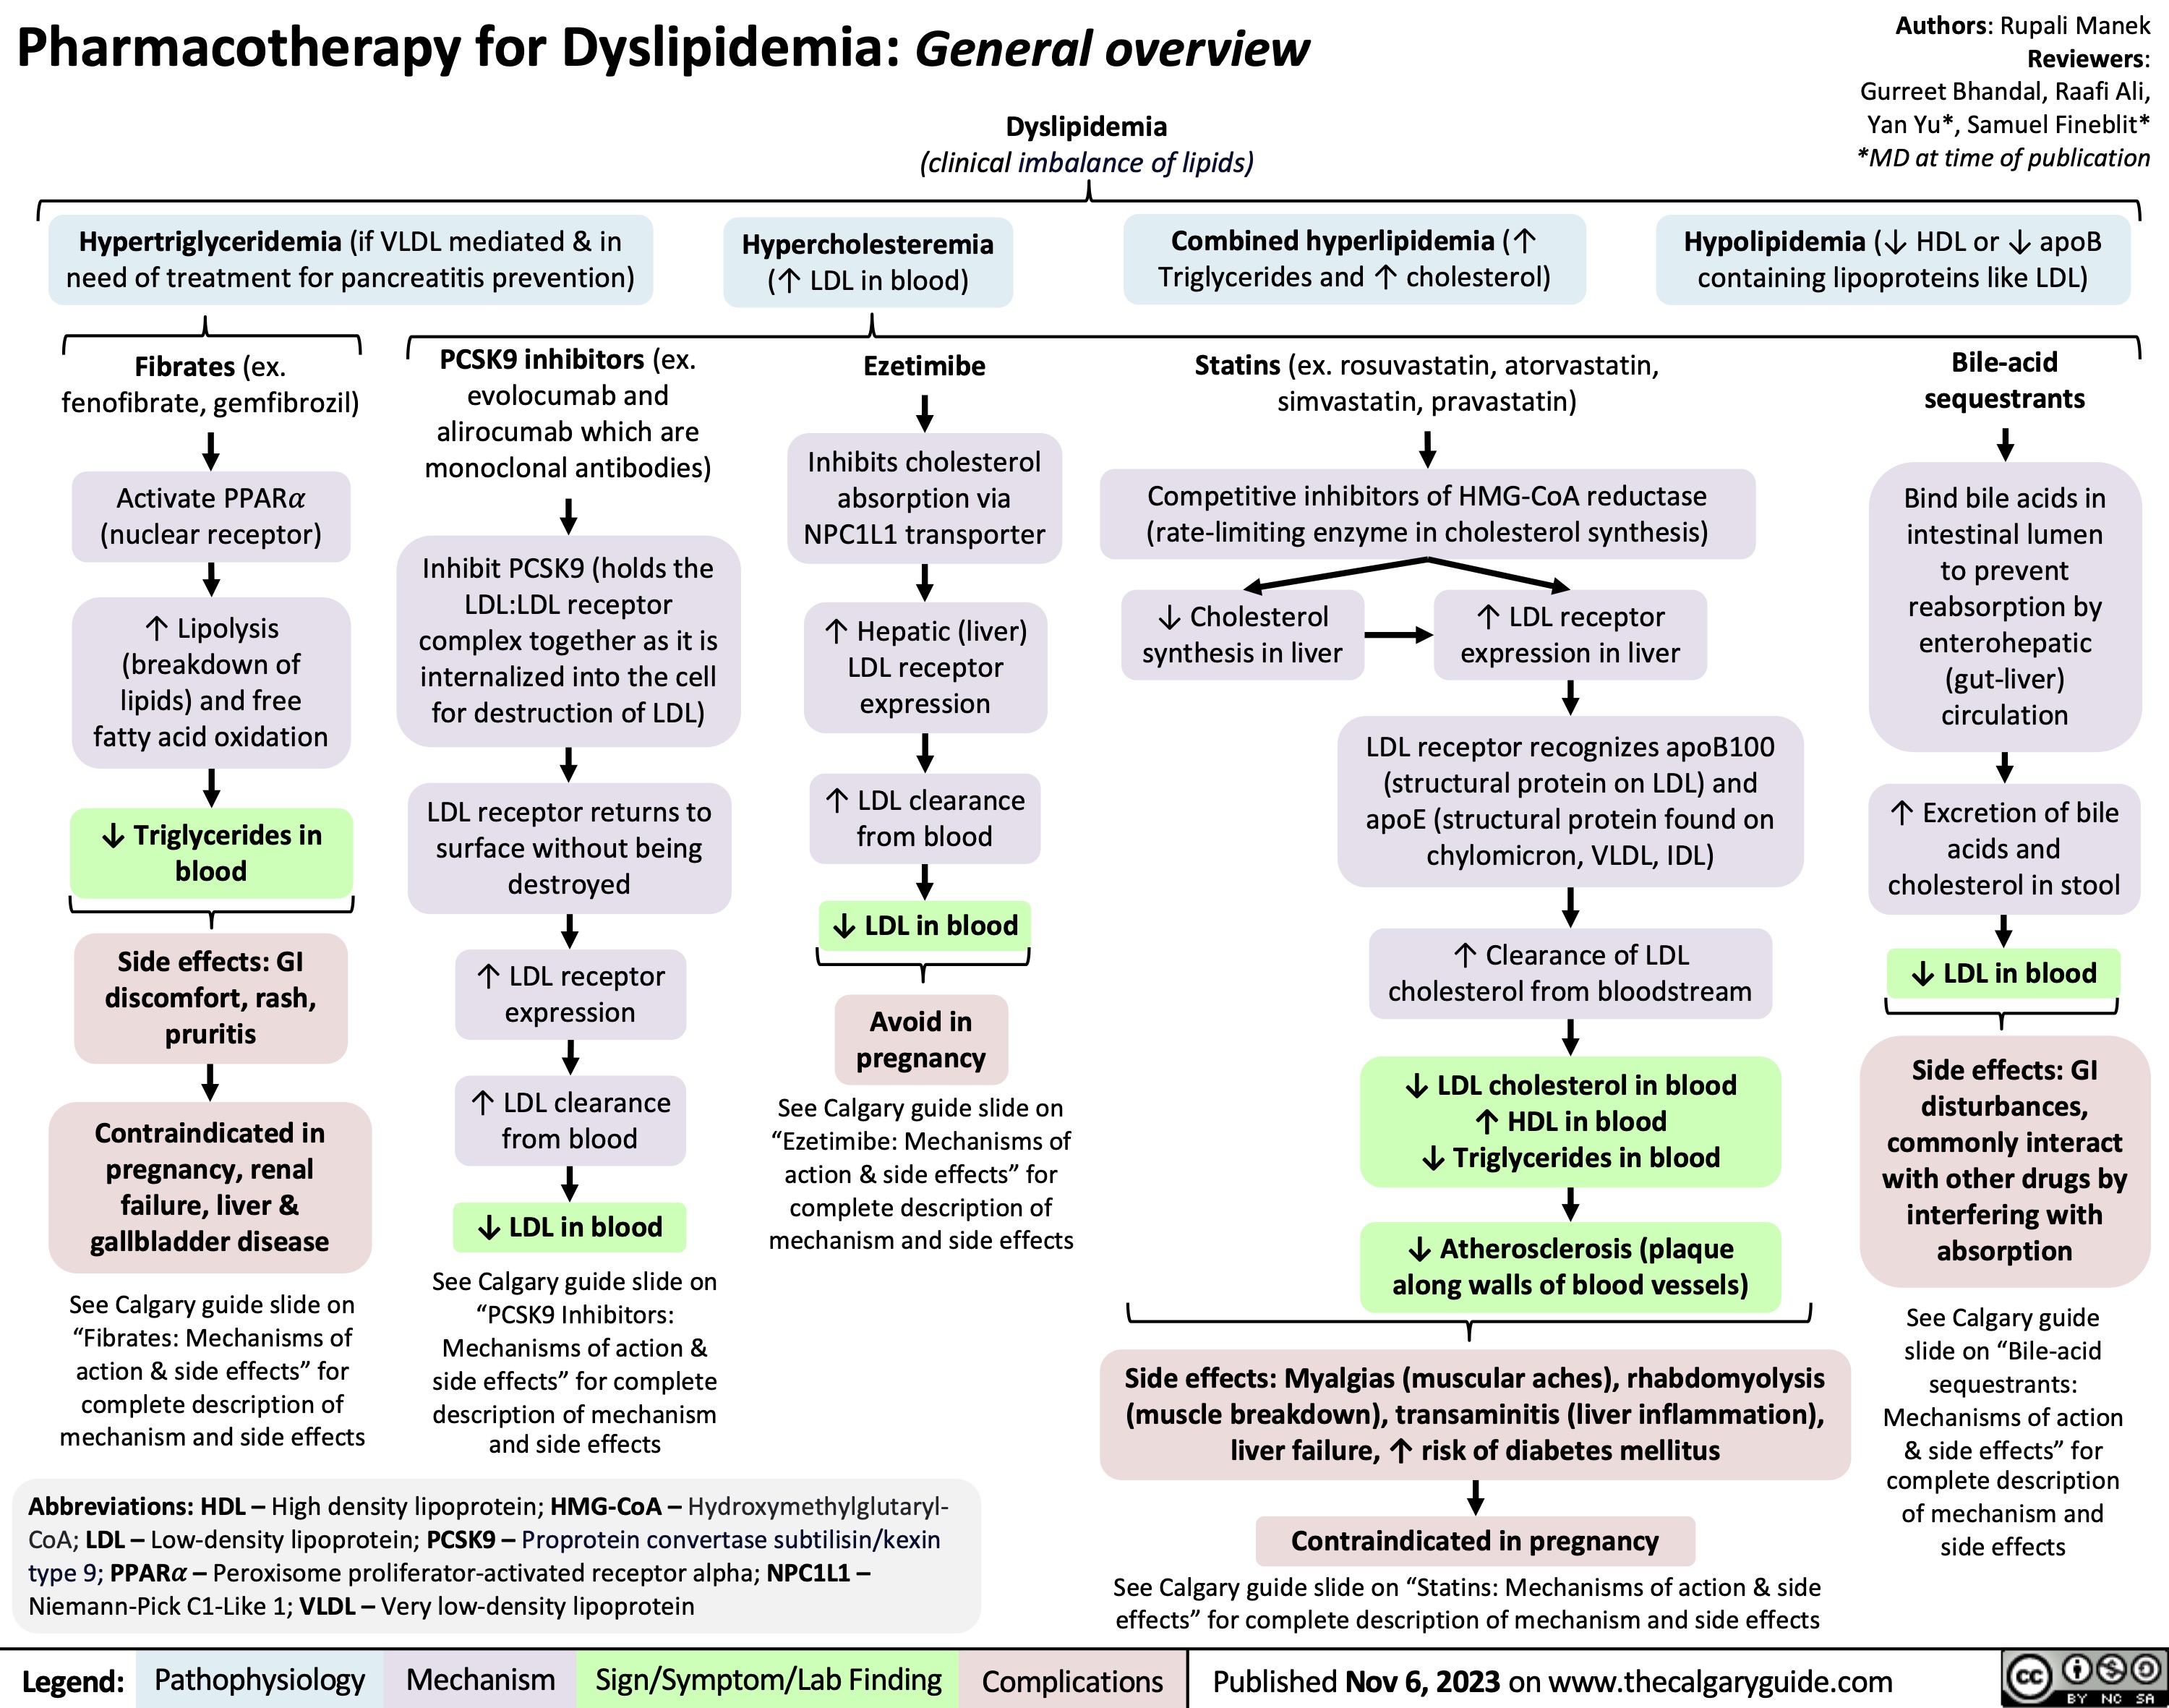 Pharmacotherapy for Dyslipidemia: General overview Dyslipidemia
Authors: Rupali Manek Reviewers: Gurreet Bhandal, Raafi Ali, Yan Yu*, Samuel Fineblit* *MD at time of publication
Hypolipidemia (↓ HDL or ↓ apoB containing lipoproteins like LDL)
Bile-acid sequestrants
Bind bile acids in intestinal lumen to prevent reabsorption by enterohepatic (gut-liver) circulation
↑ Excretion of bile acids and cholesterol in stool
↓ LDL in blood
Side effects: GI disturbances, commonly interact with other drugs by interfering with absorption
See Calgary guide slide on “Bile-acid sequestrants: Mechanisms of action & side effects” for complete description of mechanism and side effects
(clinical imbalance of lipids)
     Hypertriglyceridemia (if VLDL mediated & in need of treatment for pancreatitis prevention)
Hypercholesteremia
(↑ LDL in blood)
Ezetimibe
Inhibits cholesterol absorption via NPC1L1 transporter
↑ Hepatic (liver) LDL receptor expression
↑ LDL clearance from blood
↓ LDL in blood
Avoid in pregnancy
See Calgary guide slide on “Ezetimibe: Mechanisms of action & side effects” for complete description of mechanism and side effects
Combined hyperlipidemia (↑ Triglycerides and ↑ cholesterol)
Statins (ex. rosuvastatin, atorvastatin, simvastatin, pravastatin)
Competitive inhibitors of HMG-CoA reductase (rate-limiting enzyme in cholesterol synthesis)
  Fibrates (ex. fenofibrate, gemfibrozil)
Activate PPAR! (nuclear receptor)
↑ Lipolysis (breakdown of lipids) and free fatty acid oxidation
↓ Triglycerides in blood
Side effects: GI discomfort, rash, pruritis
Contraindicated in pregnancy, renal failure, liver & gallbladder disease
See Calgary guide slide on “Fibrates: Mechanisms of action & side effects” for complete description of mechanism and side effects
PCSK9 inhibitors (ex. evolocumab and alirocumab which are monoclonal antibodies)
Inhibit PCSK9 (holds the LDL:LDL receptor complex together as it is internalized into the cell for destruction of LDL)
LDL receptor returns to surface without being destroyed
↑ LDL receptor expression
↑ LDL clearance from blood
↓ LDL in blood
See Calgary guide slide on “PCSK9 Inhibitors: Mechanisms of action & side effects” for complete description of mechanism and side effects
↓ Cholesterol synthesis in liver
↑ LDL receptor expression in liver
LDL receptor recognizes apoB100 (structural protein on LDL) and apoE (structural protein found on chylomicron, VLDL, IDL)
↑ Clearance of LDL cholesterol from bloodstream
↓ LDL cholesterol in blood ↑ HDL in blood
↓ Triglycerides in blood
↓ Atherosclerosis (plaque along walls of blood vessels)
                                  Abbreviations: HDL – High density lipoprotein; HMG-CoA – Hydroxymethylglutaryl- CoA; LDL – Low-density lipoprotein; PCSK9 – Proprotein convertase subtilisin/kexin type 9; PPAR! – Peroxisome proliferator-activated receptor alpha; NPC1L1 – Niemann-Pick C1-Like 1; VLDL – Very low-density lipoprotein
Side effects: Myalgias (muscular aches), rhabdomyolysis (muscle breakdown), transaminitis (liver inflammation), liver failure, ↑ risk of diabetes mellitus
Contraindicated in pregnancy
See Calgary guide slide on “Statins: Mechanisms of action & side effects” for complete description of mechanism and side effects
  Legend:
 Pathophysiology
 Mechanism
 Sign/Symptom/Lab Finding
 Complications
 Published Nov 6, 2023 on www.thecalgaryguide.com
 